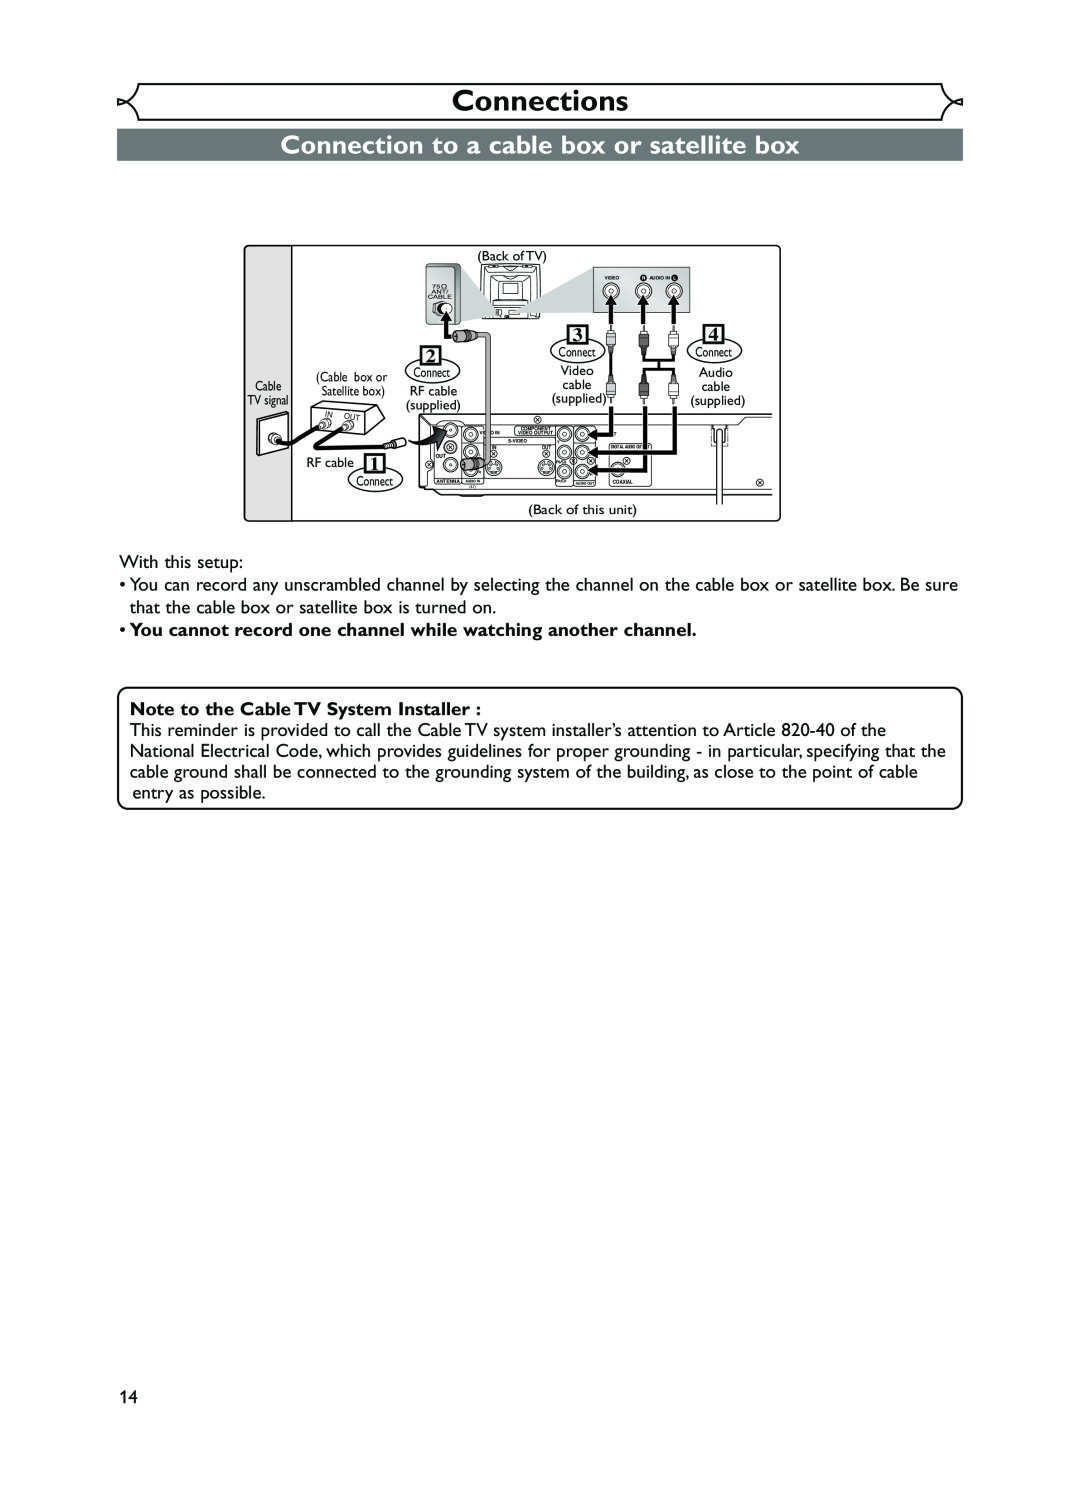 FUNAI EWR10D5 owner manual Connection to a cable box or satellite box, Connections, Note to the Cable TV System Installer 